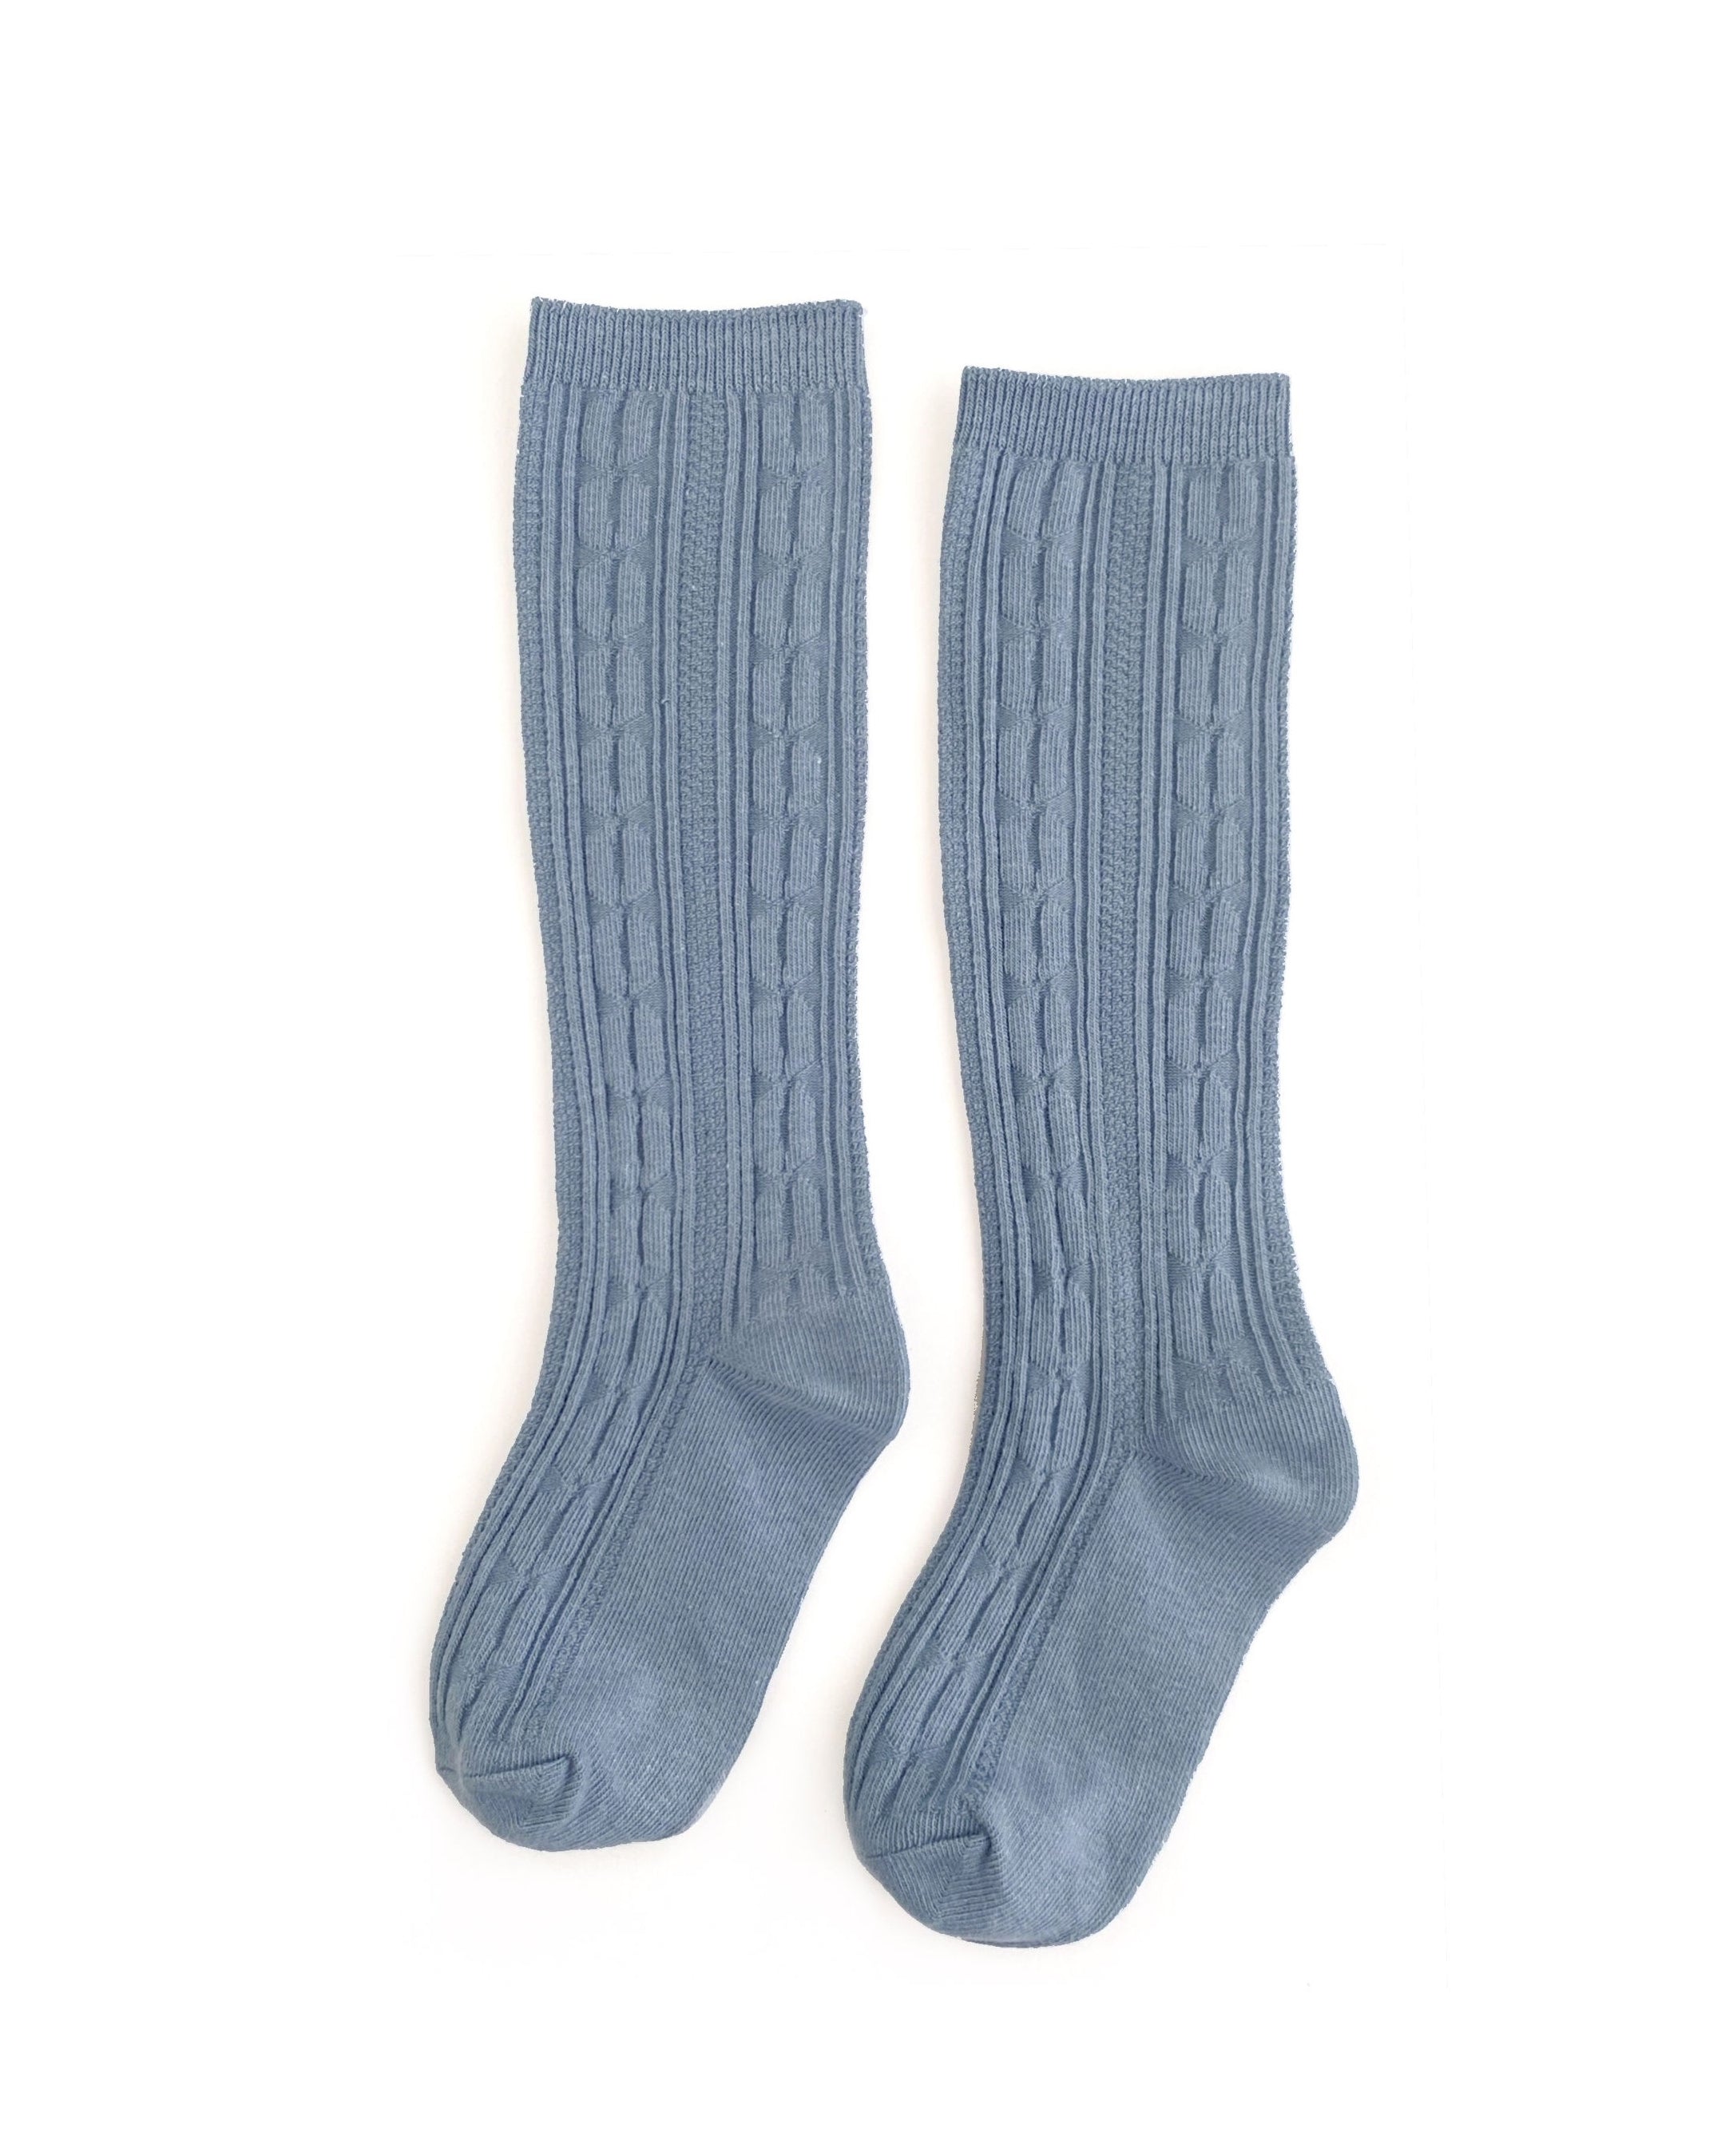 Steel Blue Knee High Socks  A Touch of Magnolia Boutique   